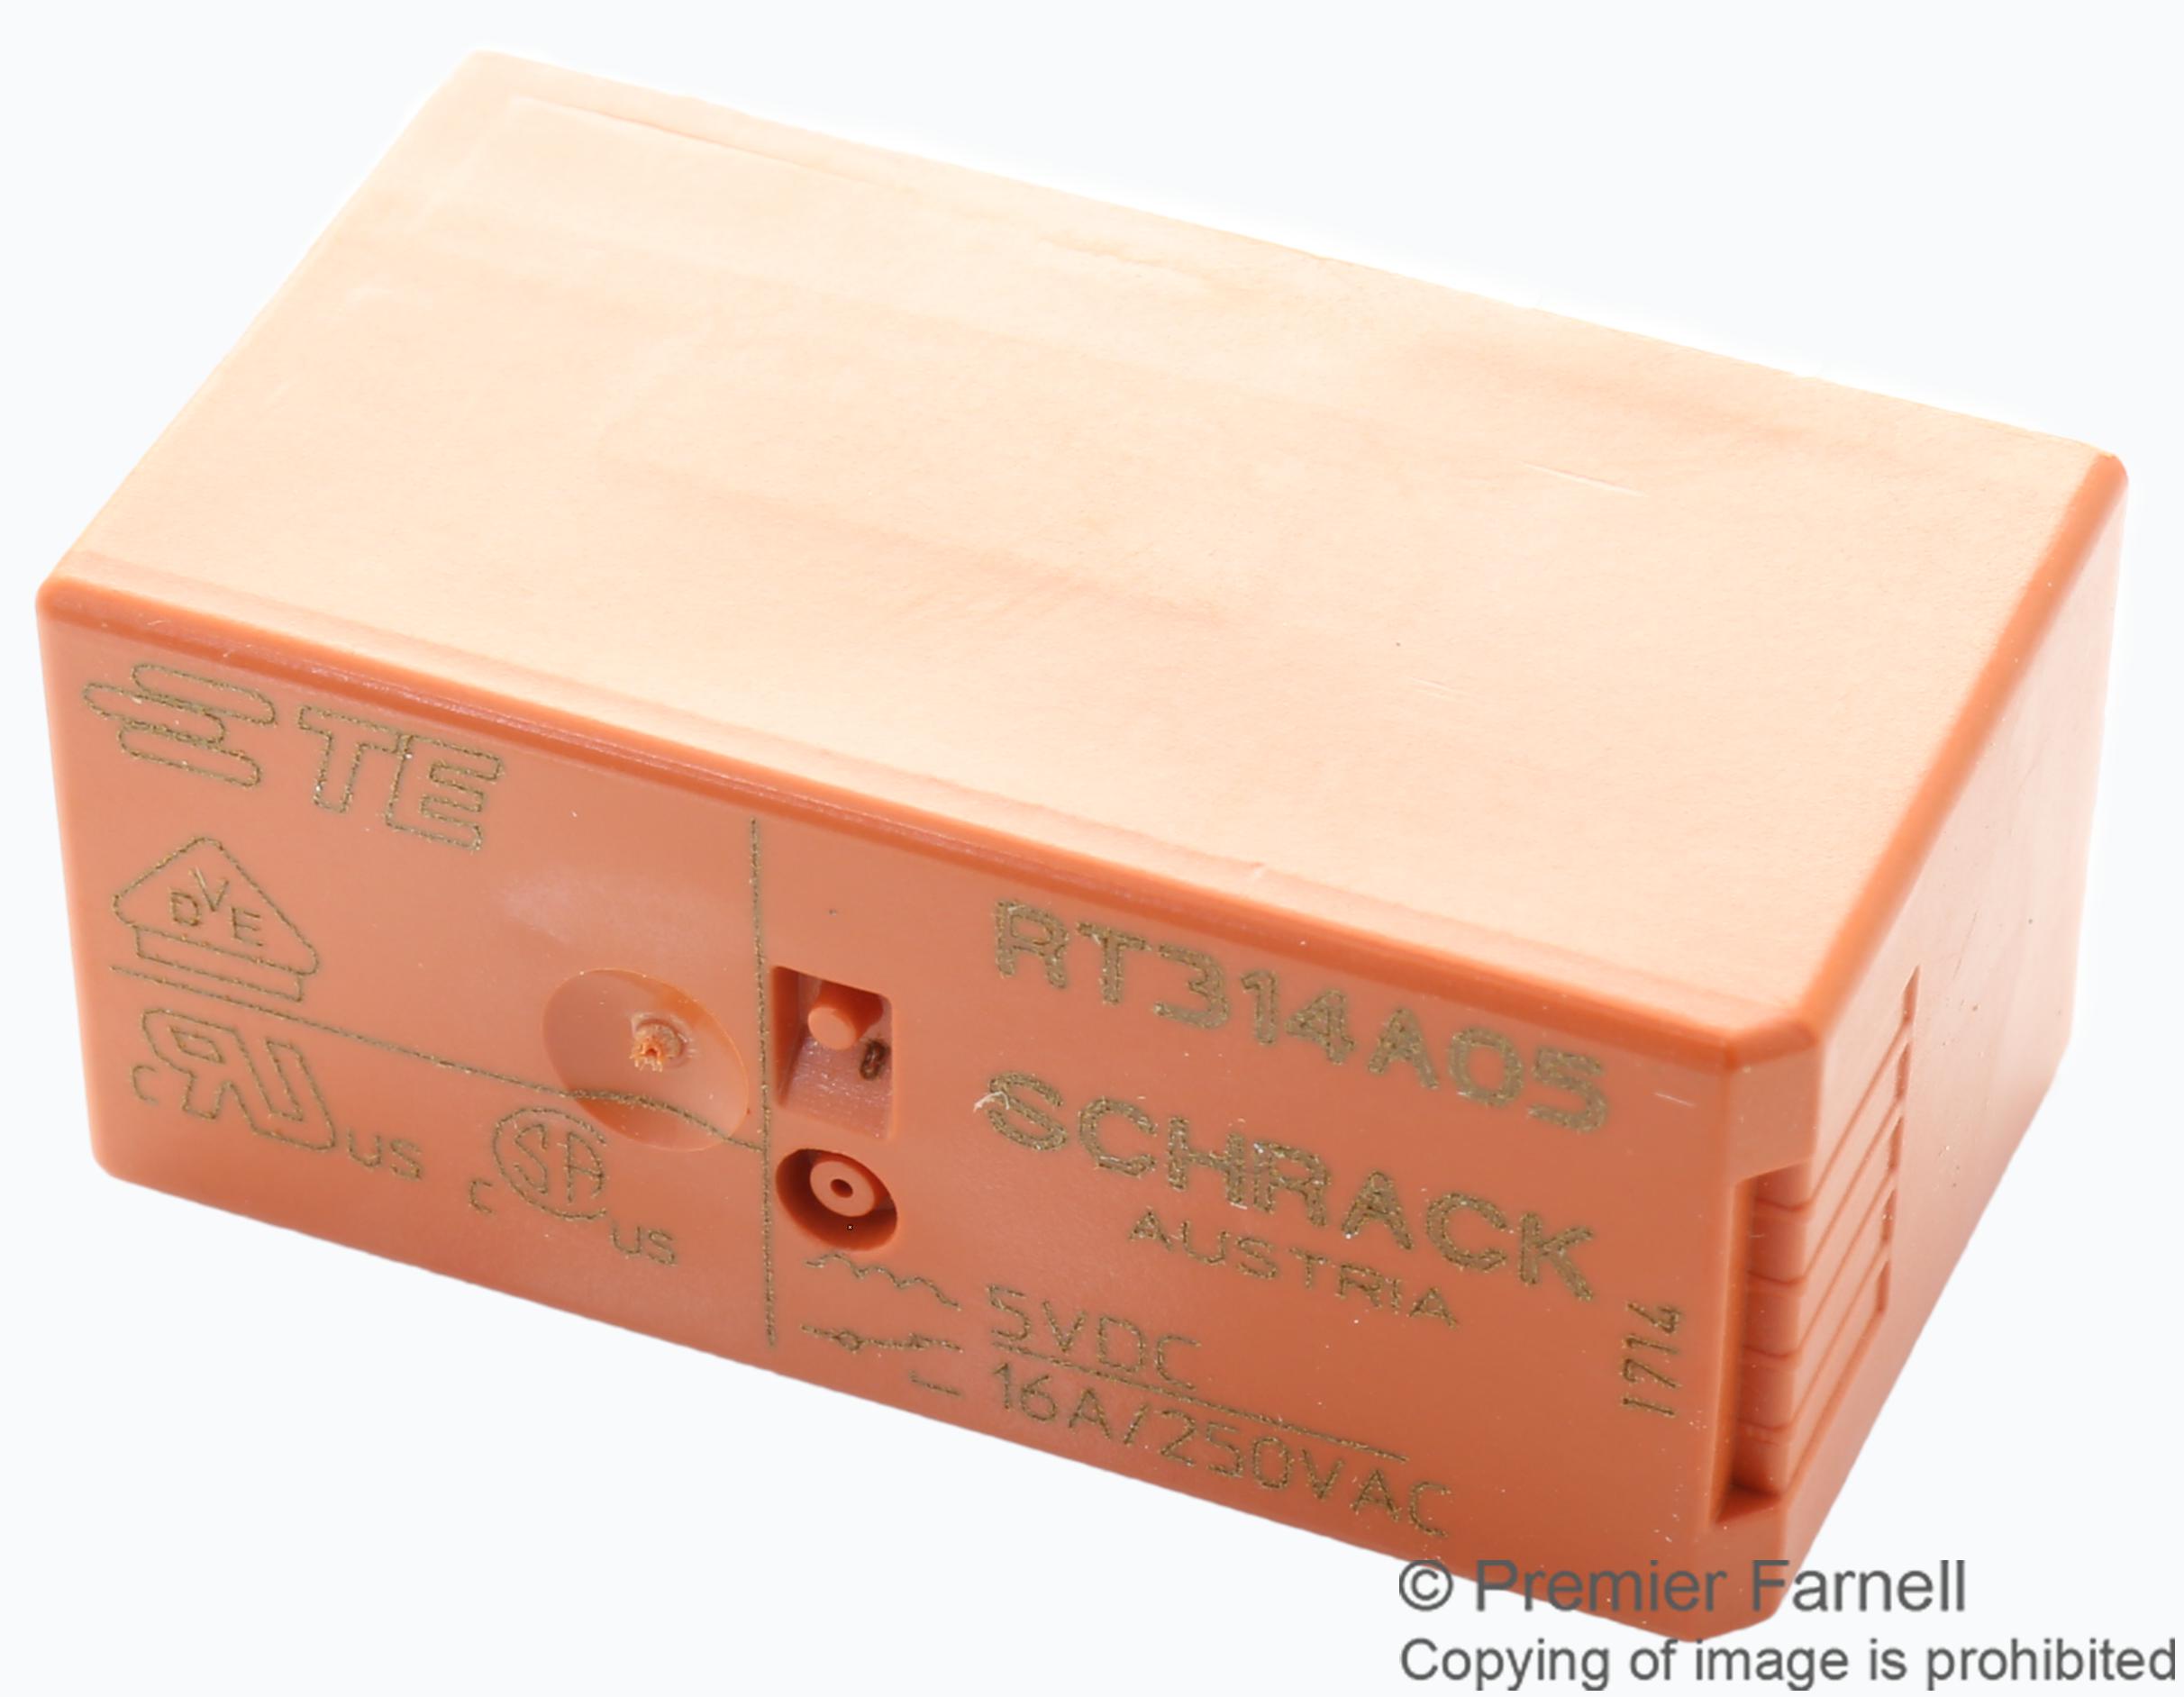 RTE24110 POWER RELAY, DPDT, 10A, 250VAC, TH SCHRACK - TE CONNECTIVITY